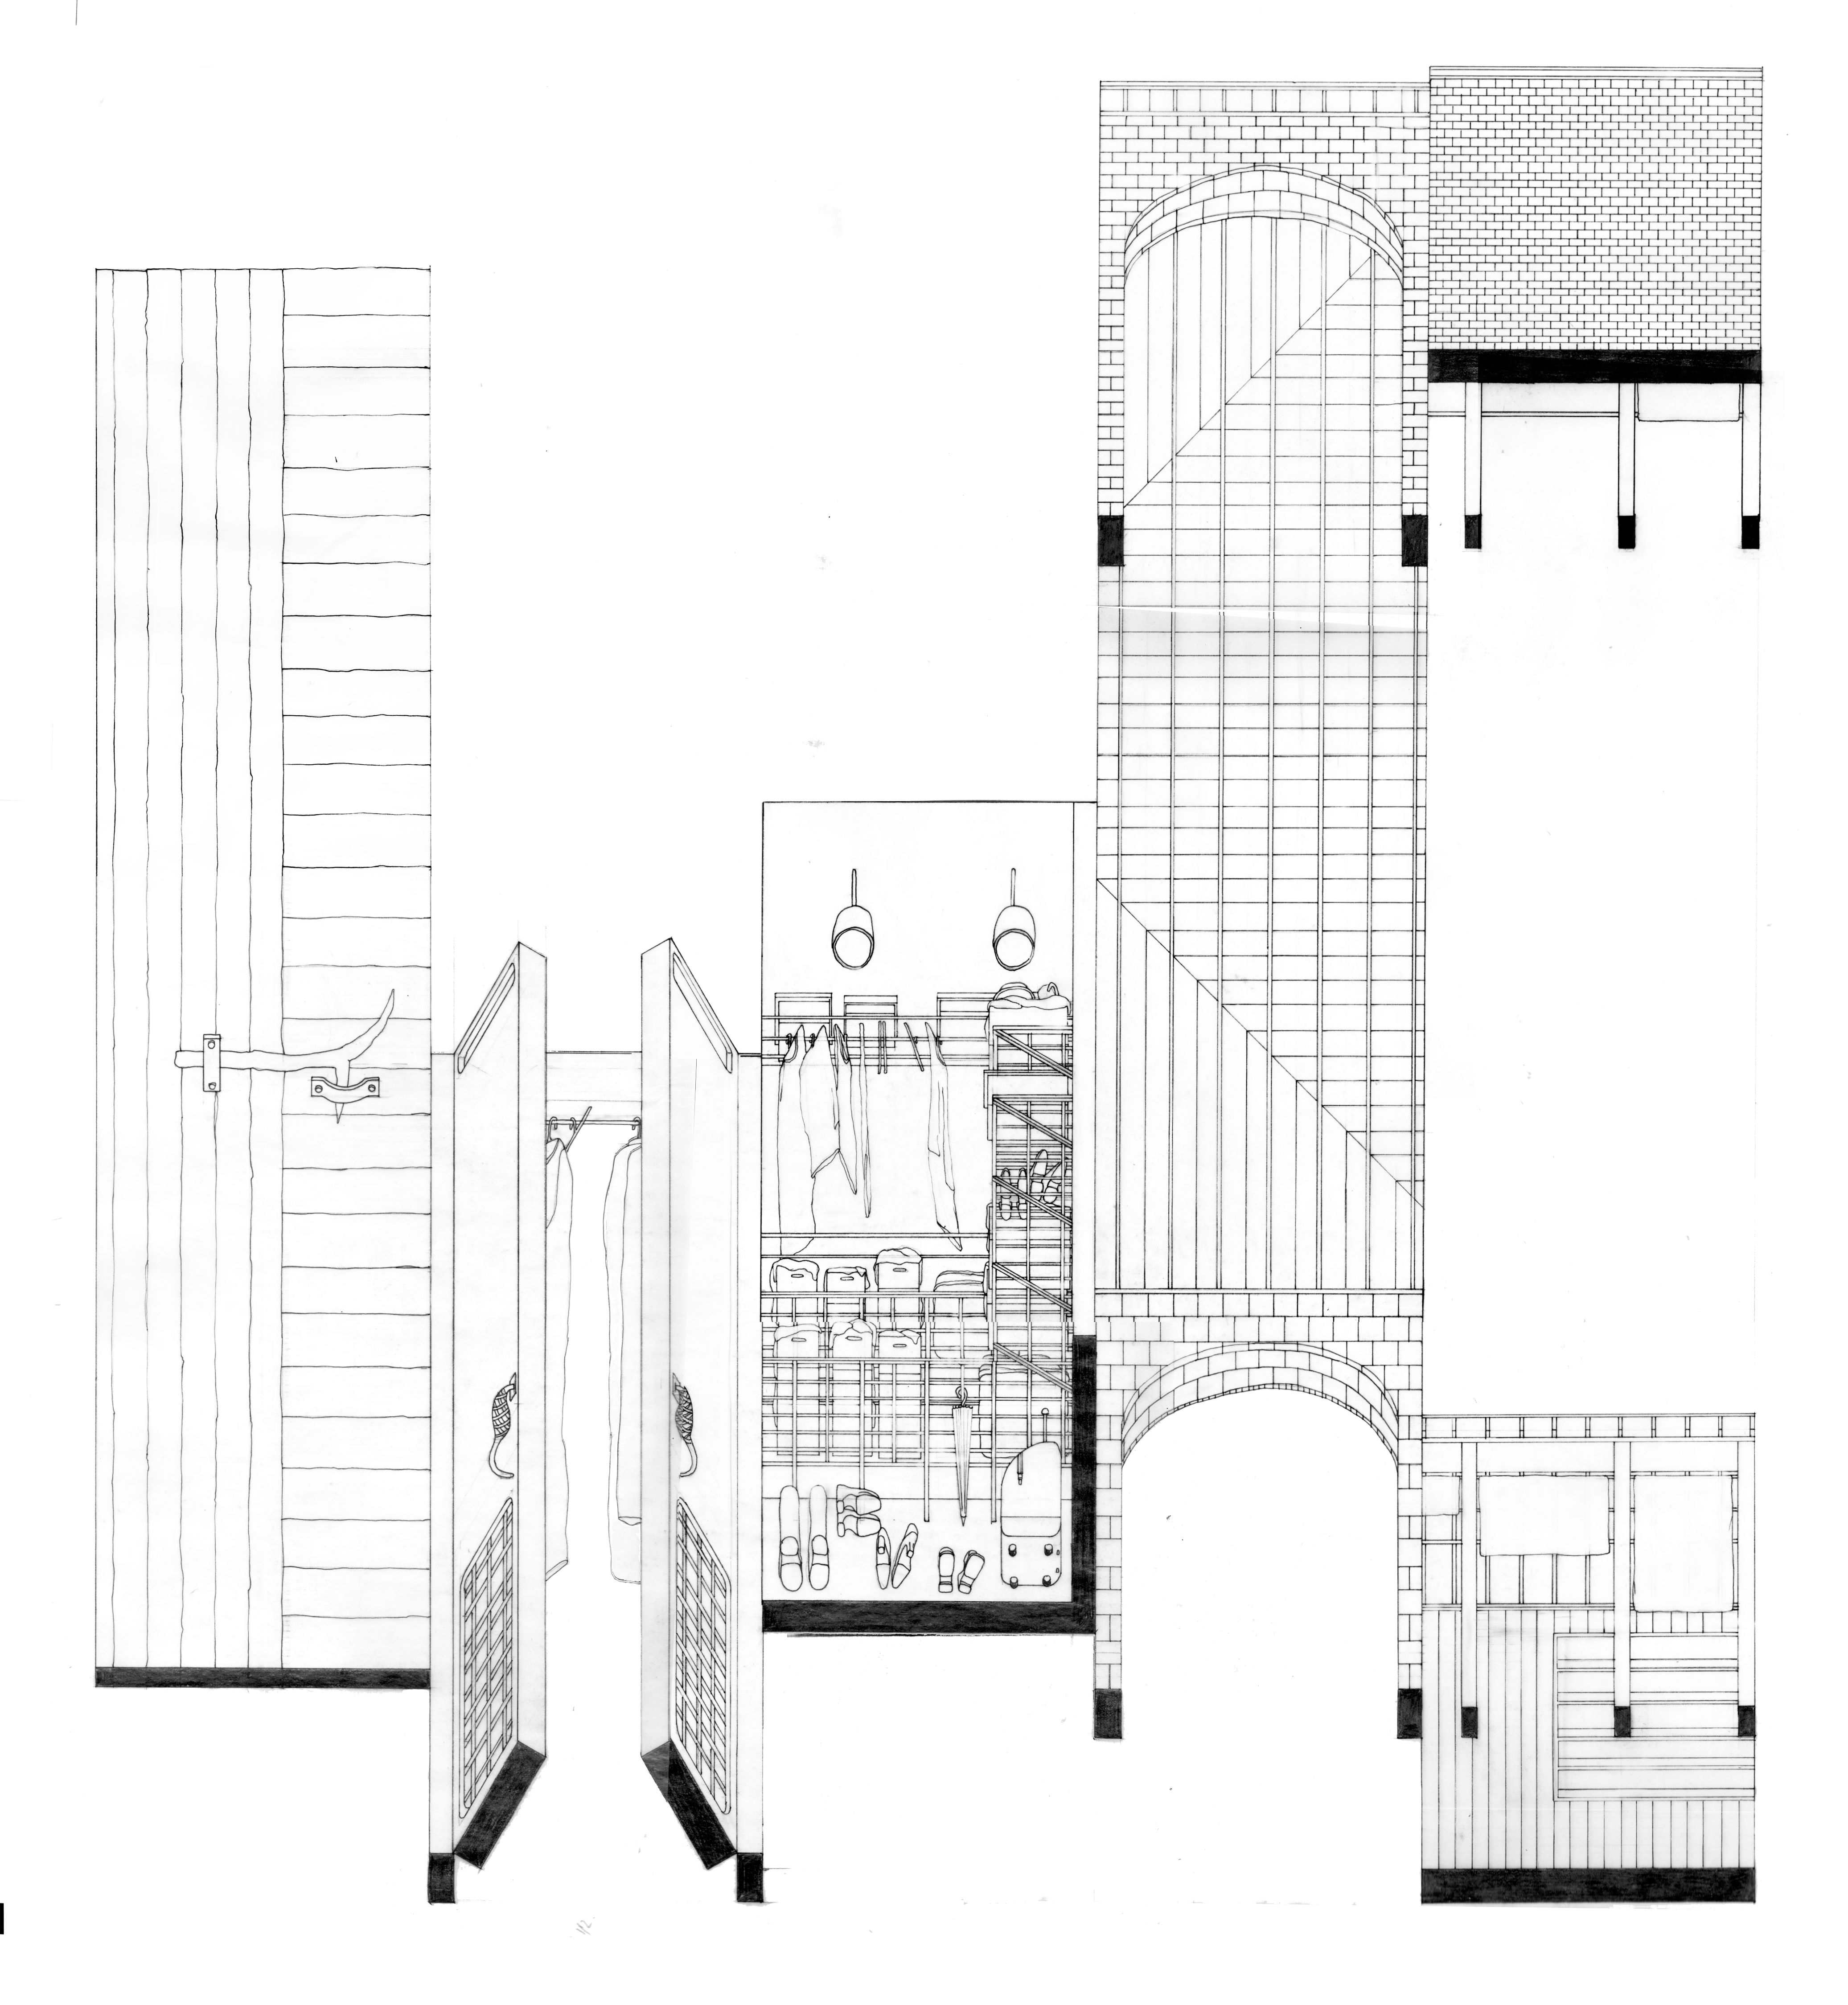 Projected at zero degrees, five types of closets are shown in black and white linework. From a forked branch door latch - the root meaning of the word closet -  on the left, to a cloister - a space derived from the idea of a closet on right.